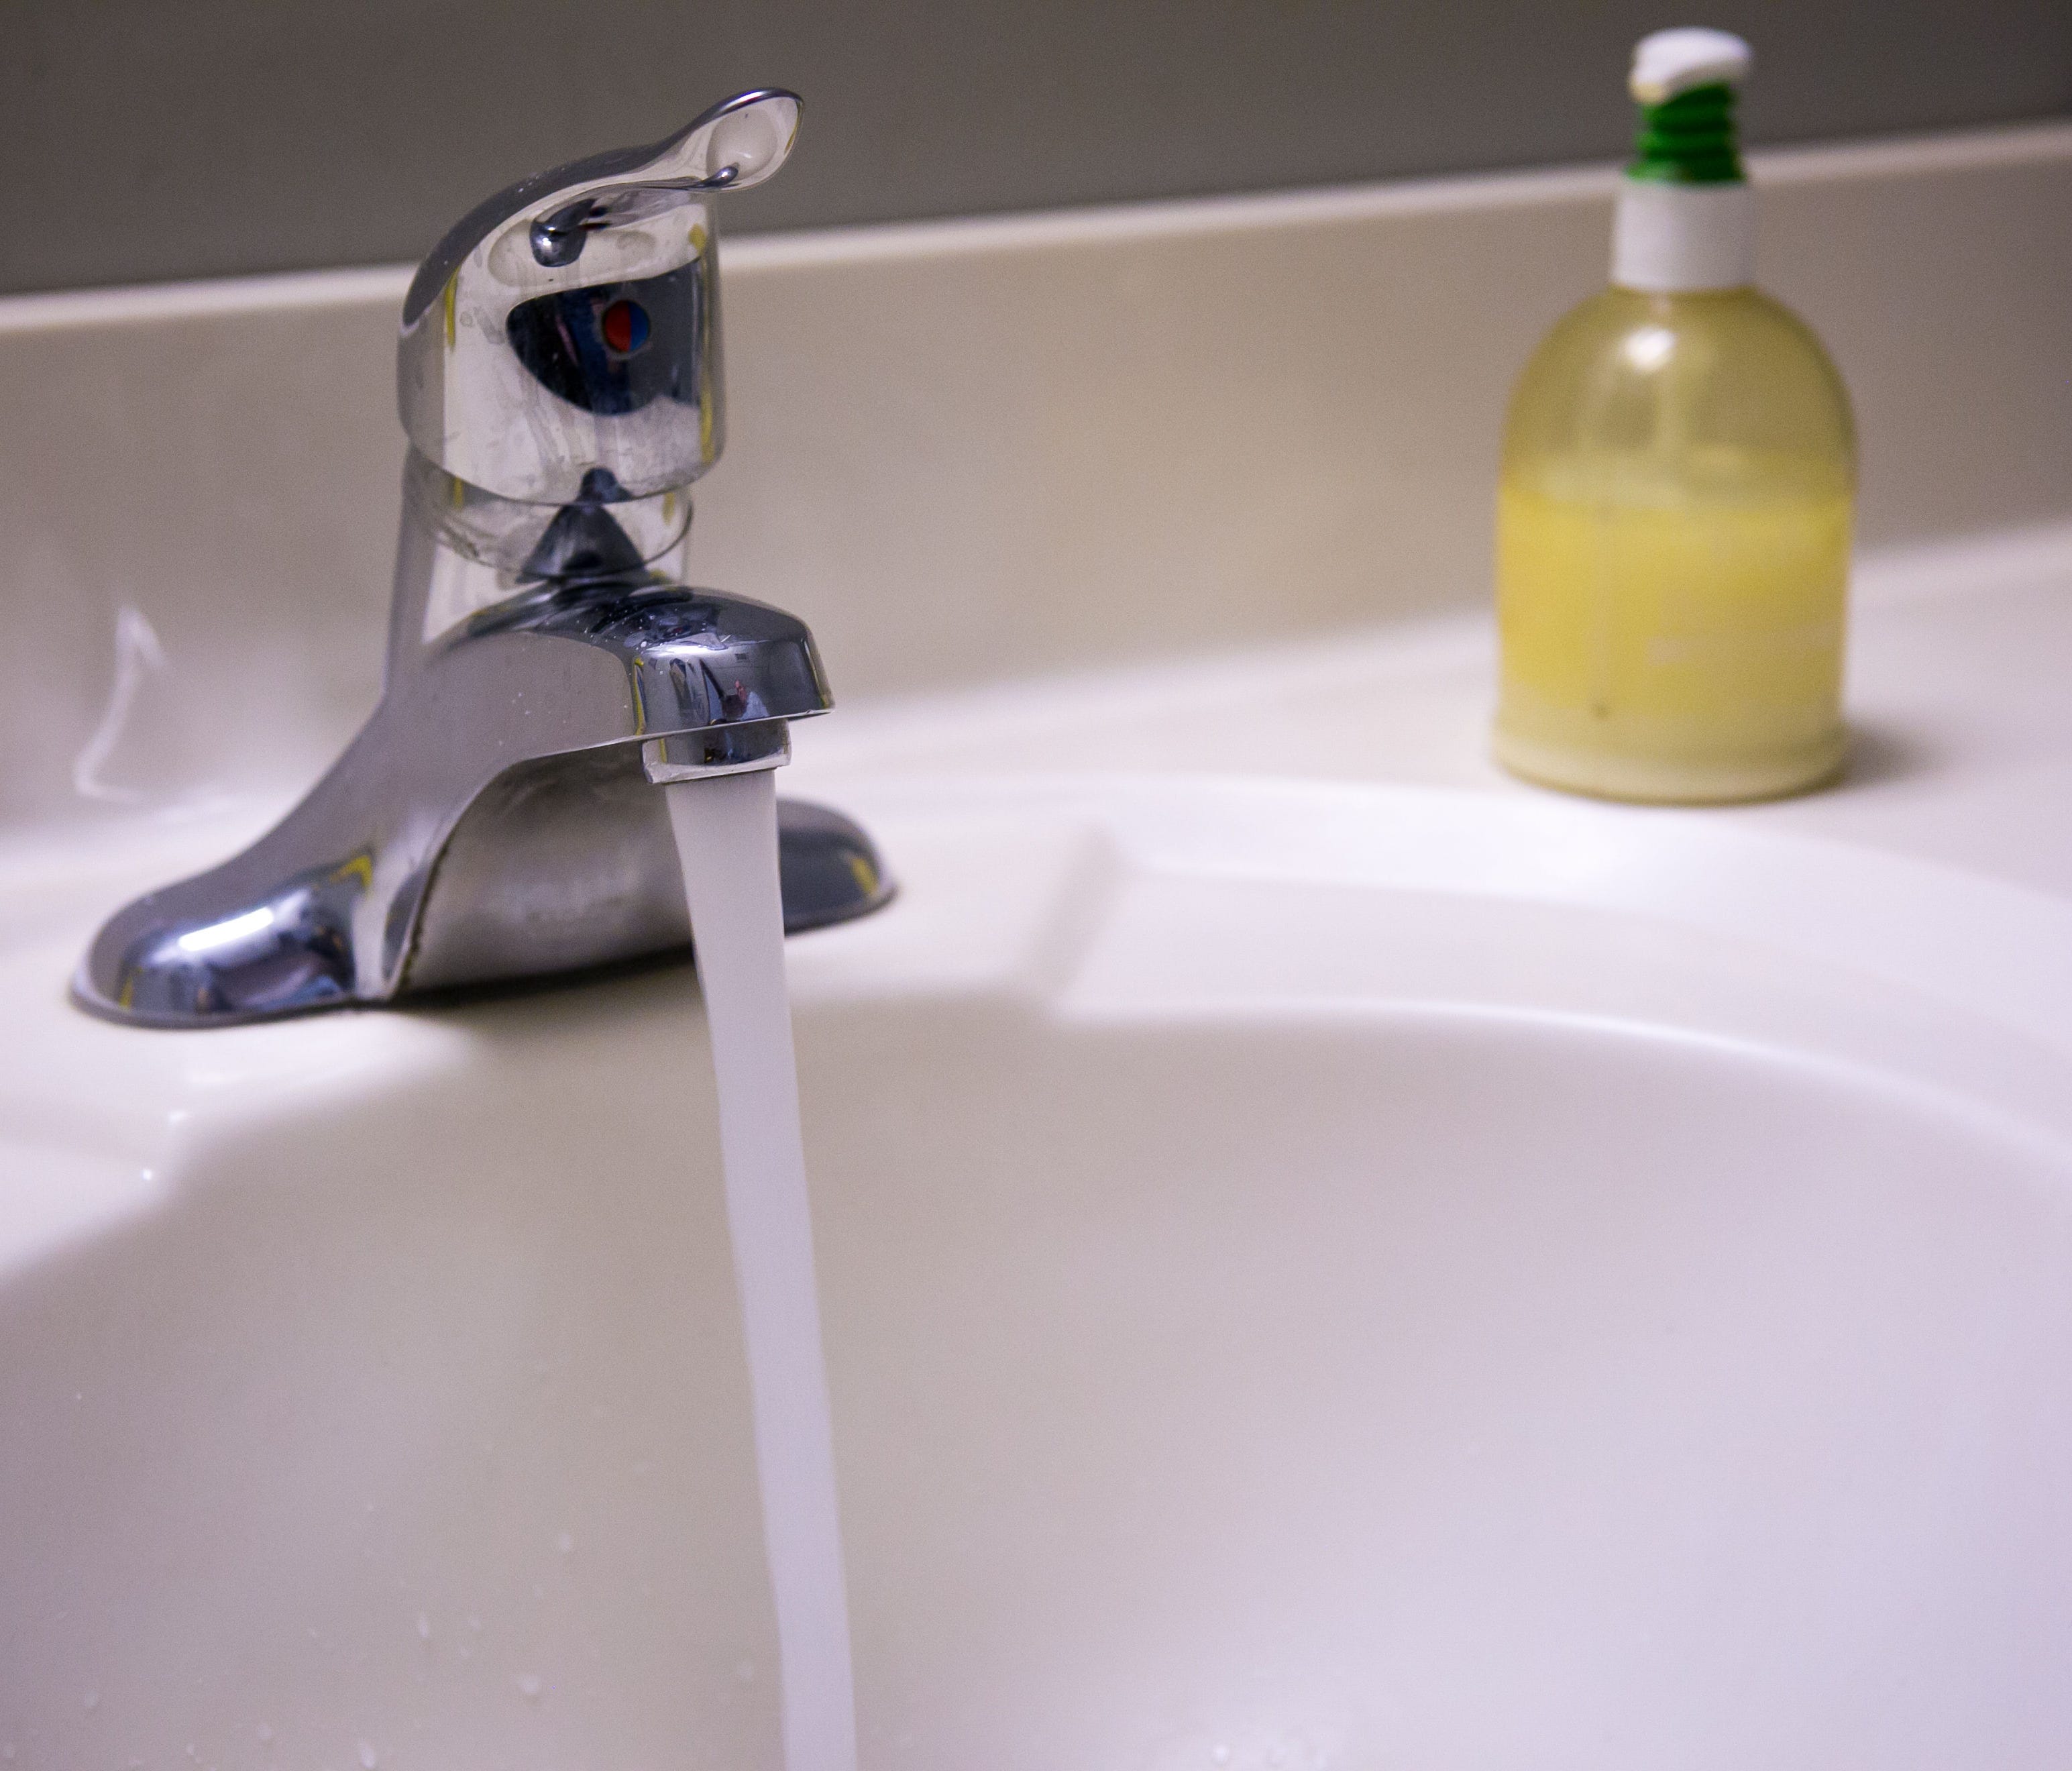 A new database examines contaminants in tap water.